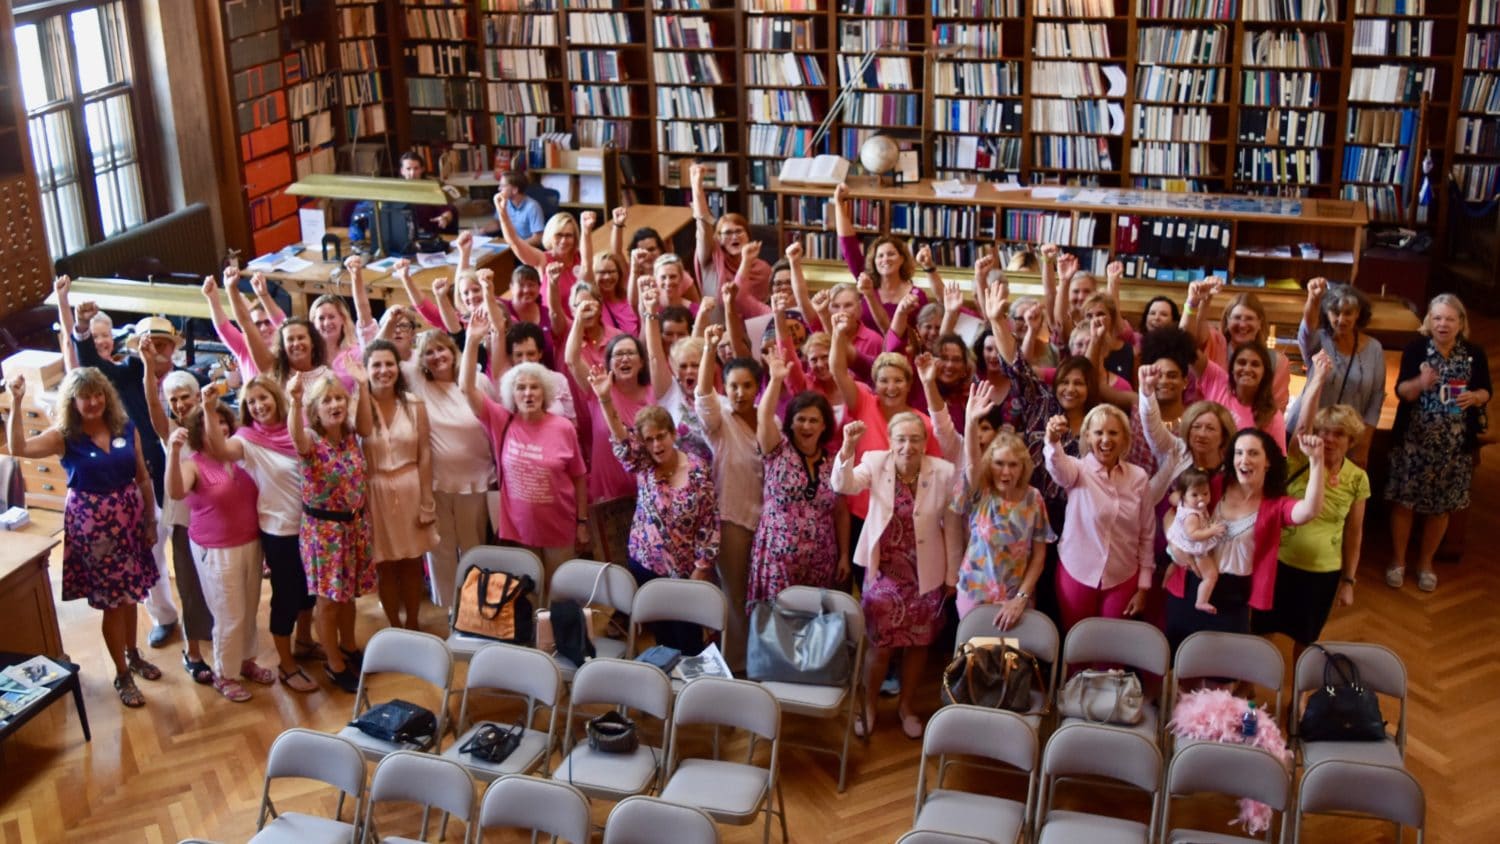 Women candidates and elected officials celebrate a ‘pink wave’ at the State House